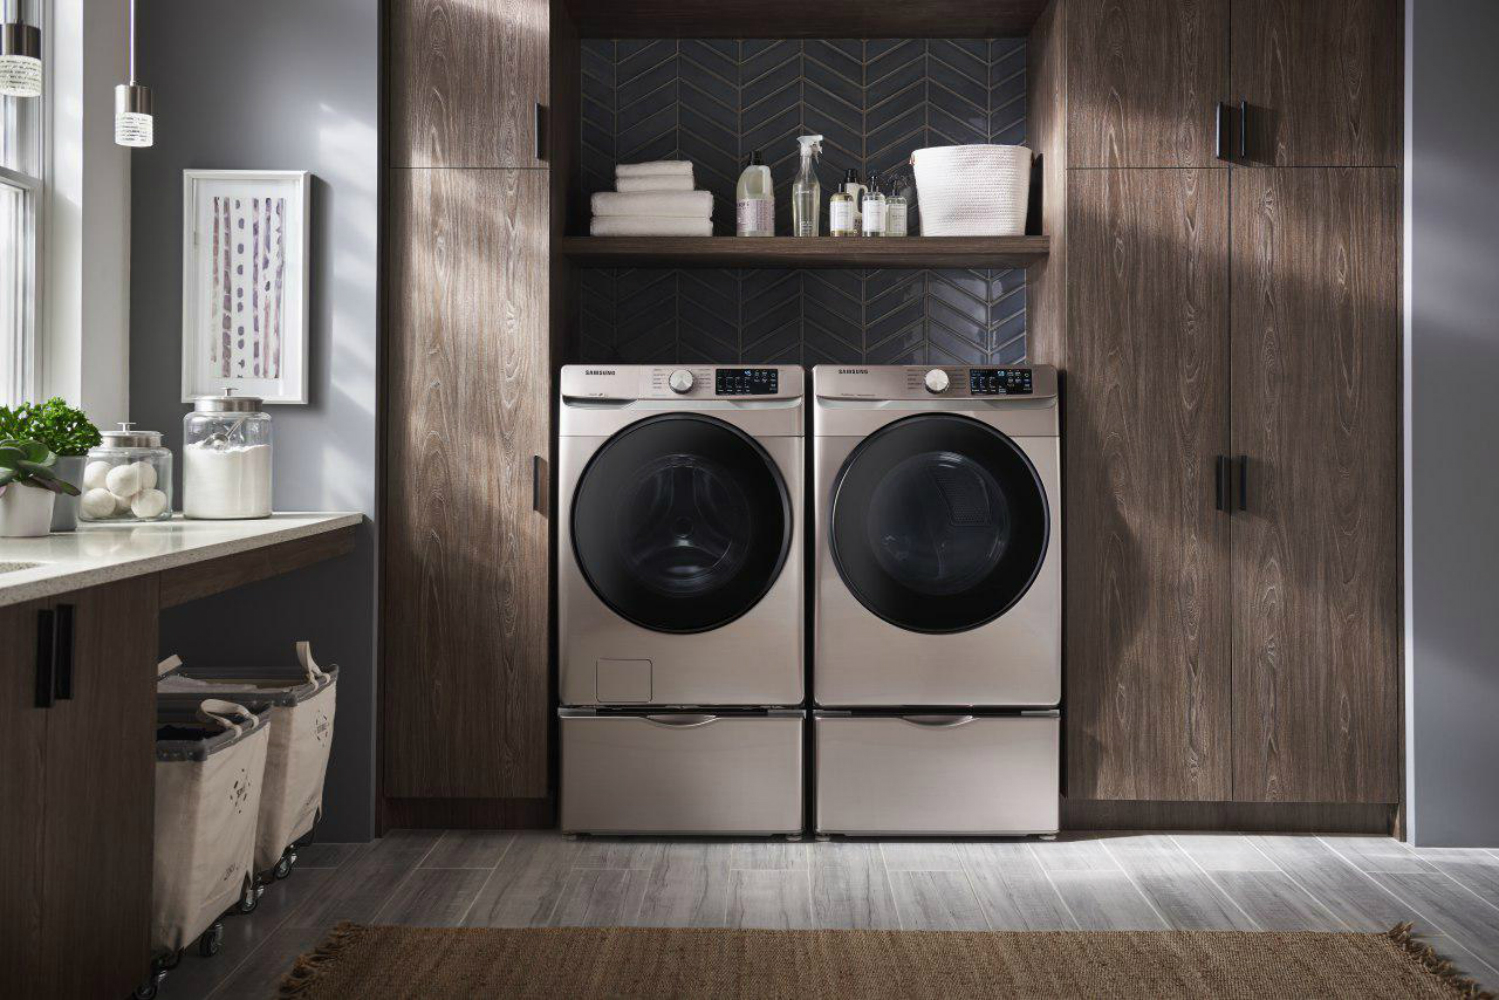 Best 4th of July washer and dryer deals for 2022